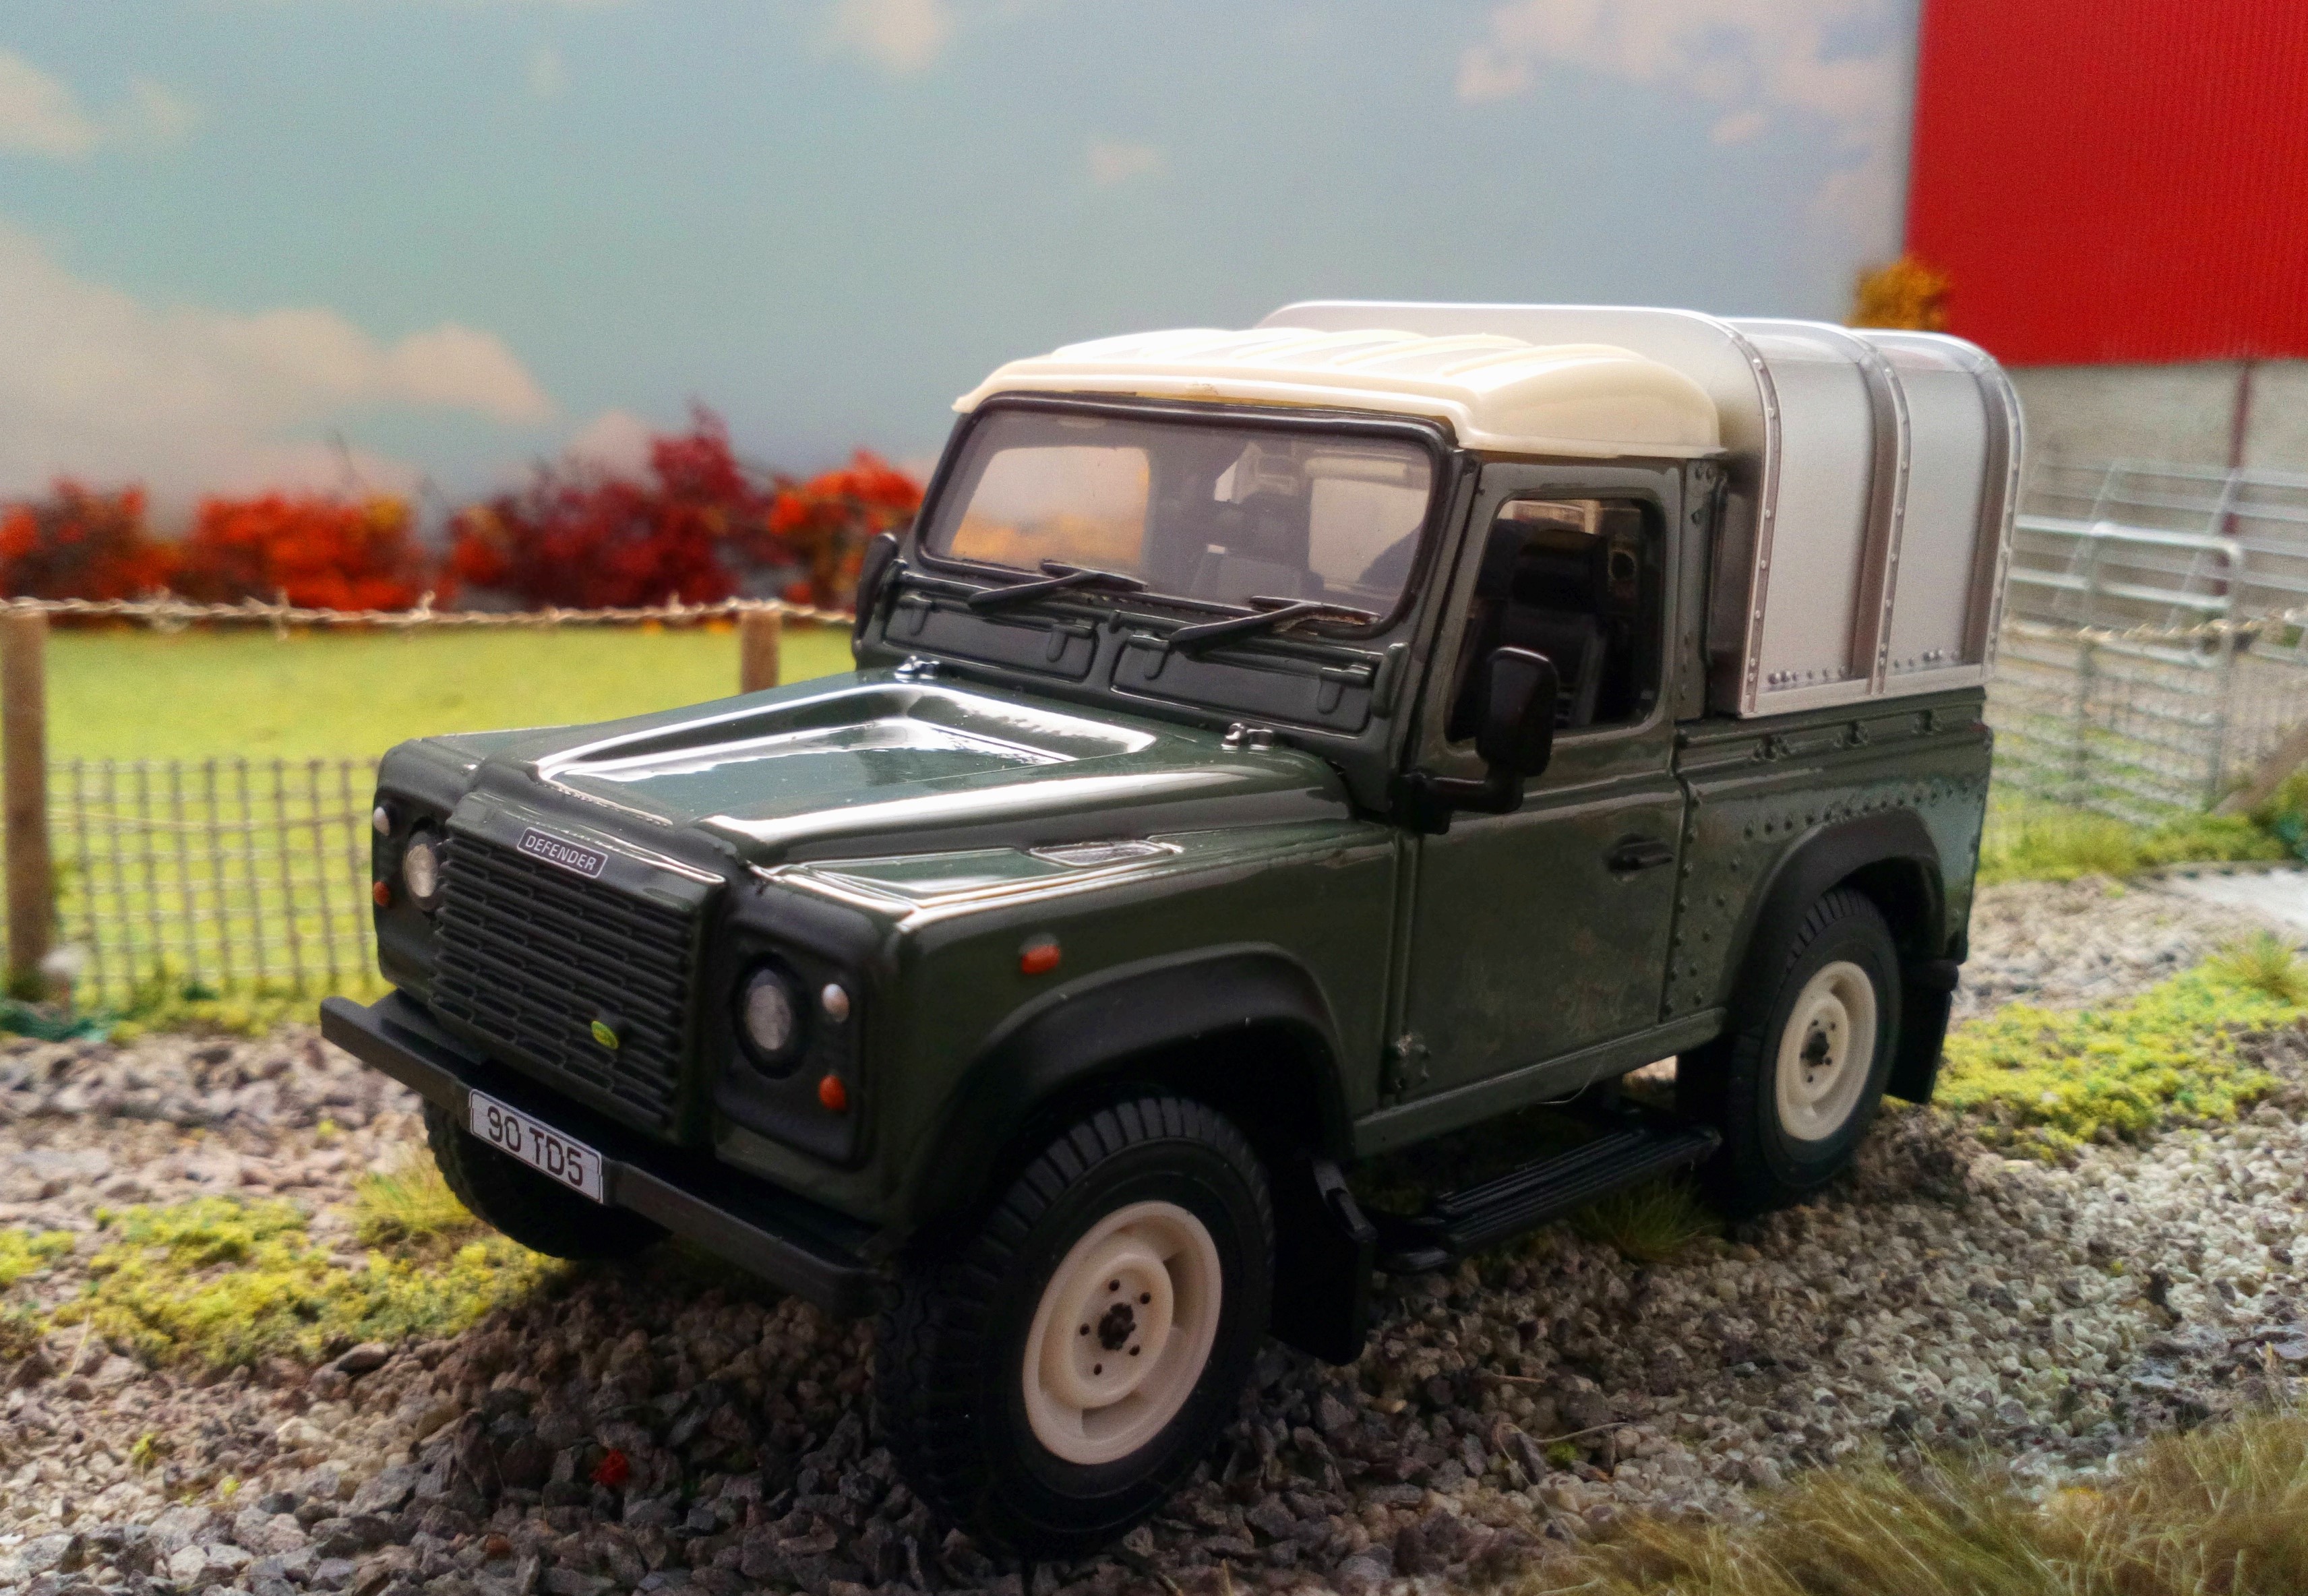 BRITAINS toytrac 2019 Show Model Land Rover Defender 90 1:32 SCALE limited 50pcs 